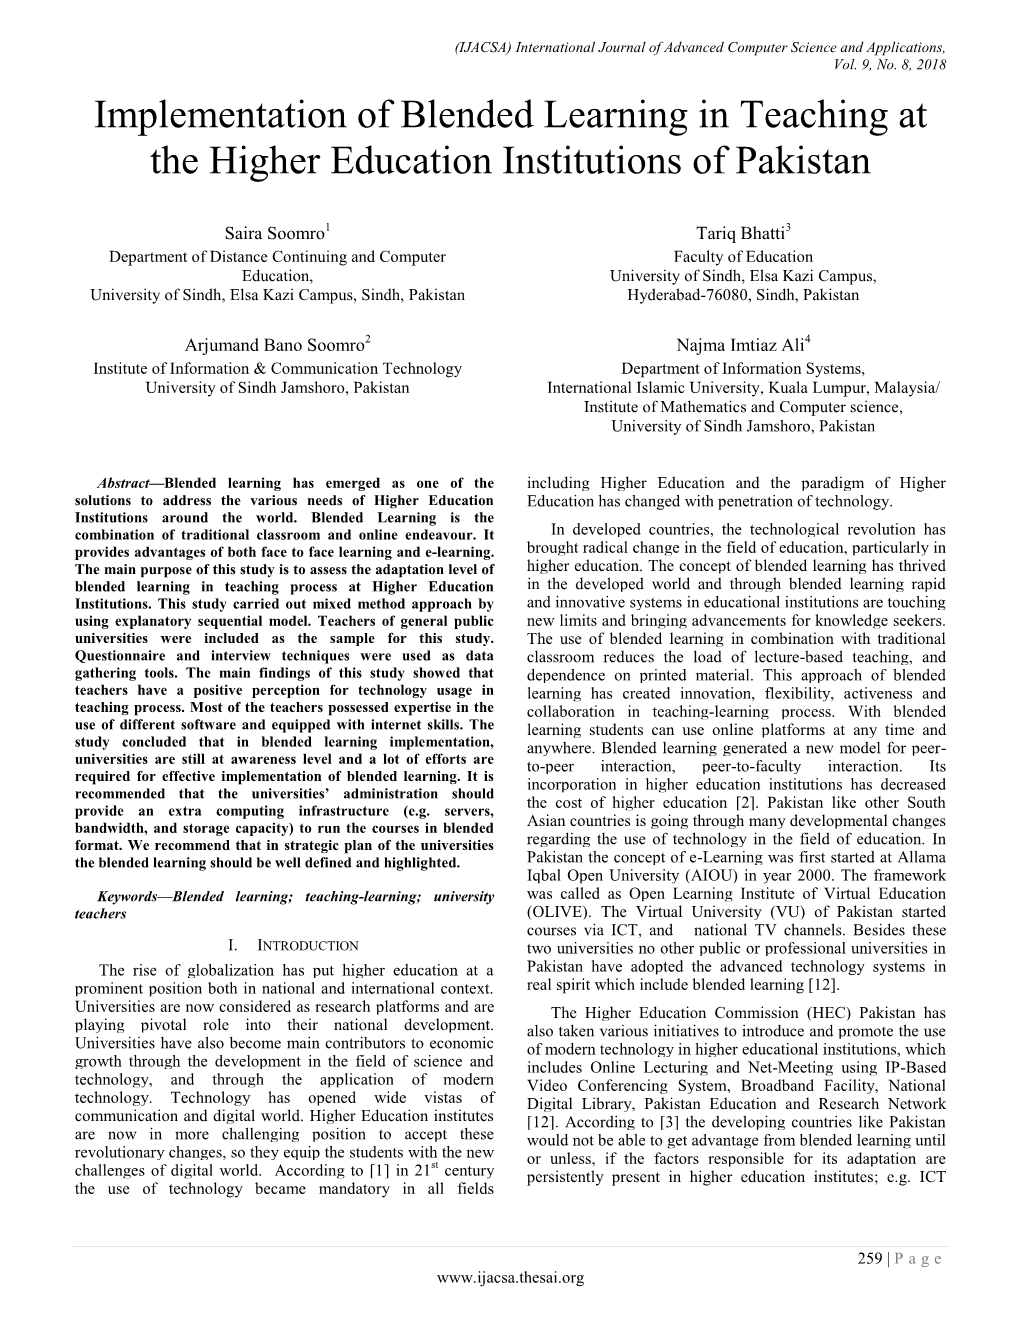 Implementation of Blended Learning in Teaching at the Higher Education Institutions of Pakistan